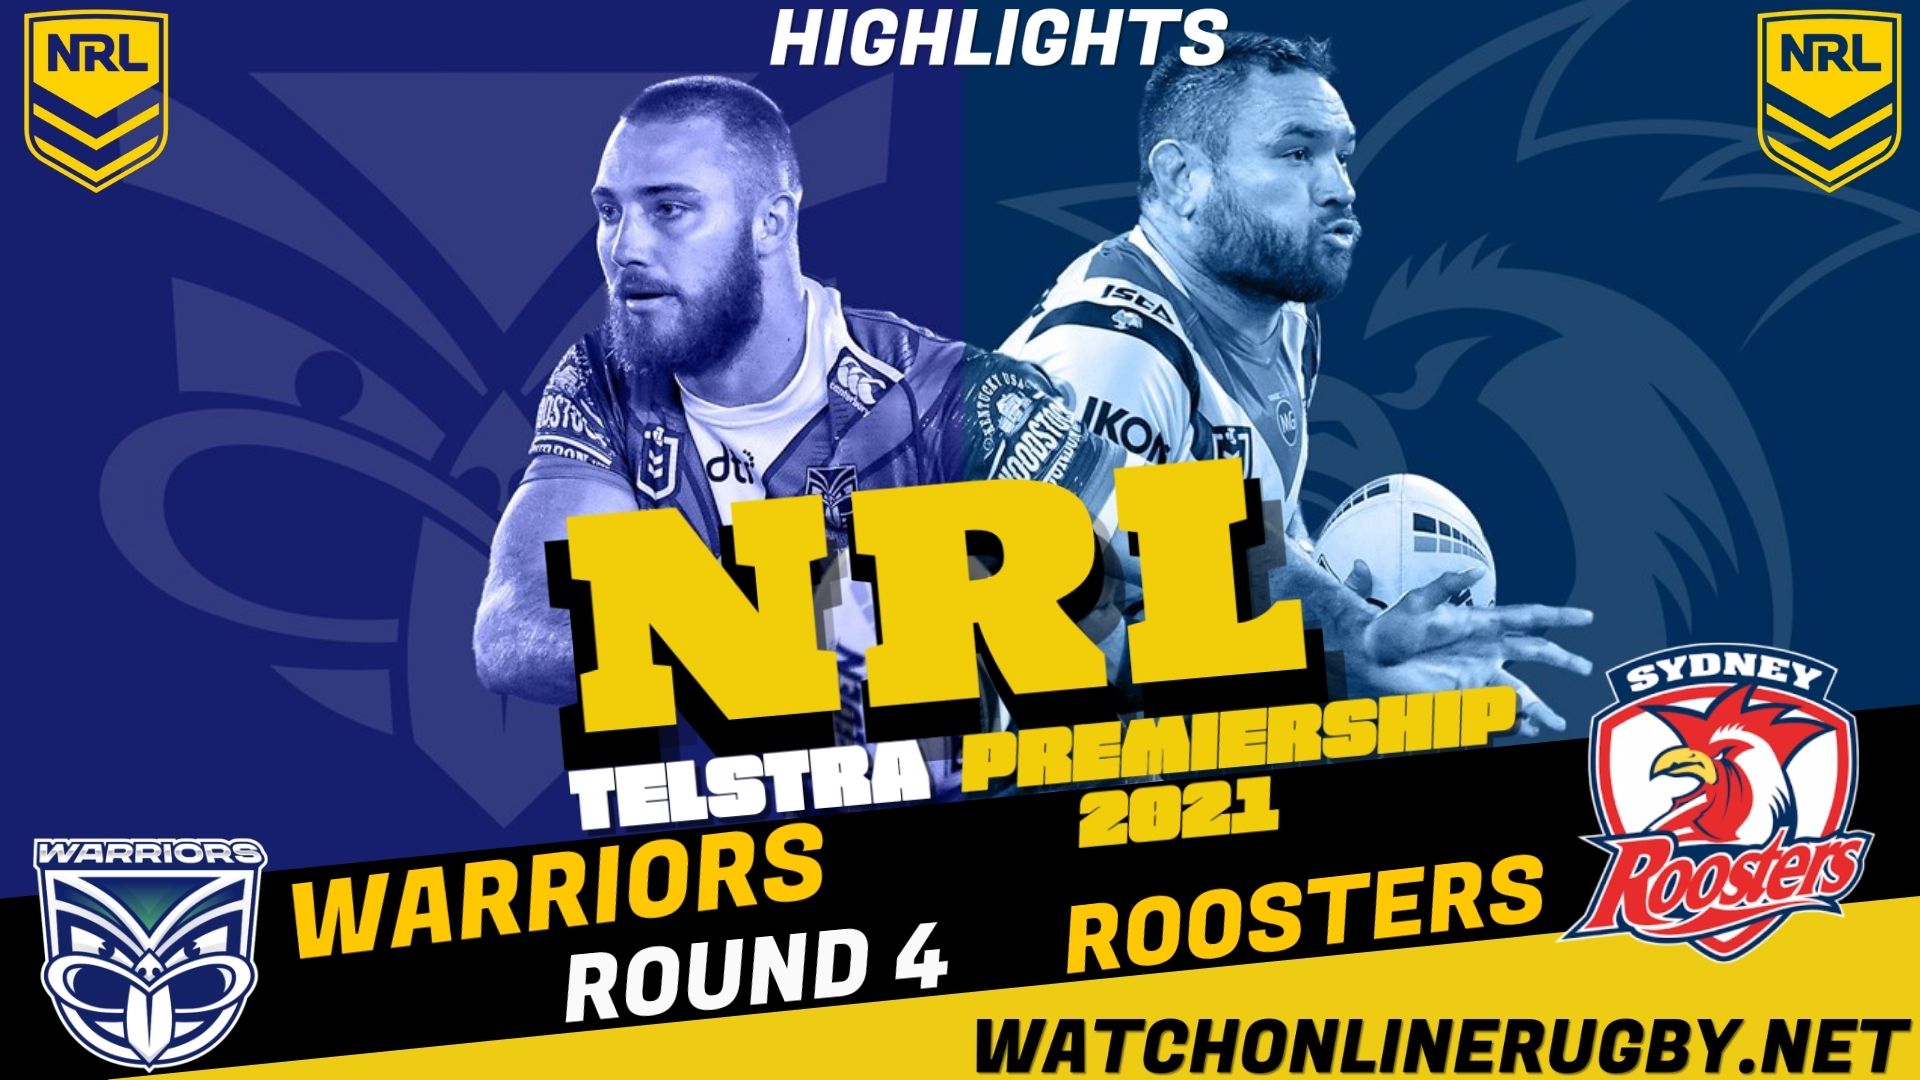 Roosters Vs Warriors Highlights RD 4 NRL Rugby